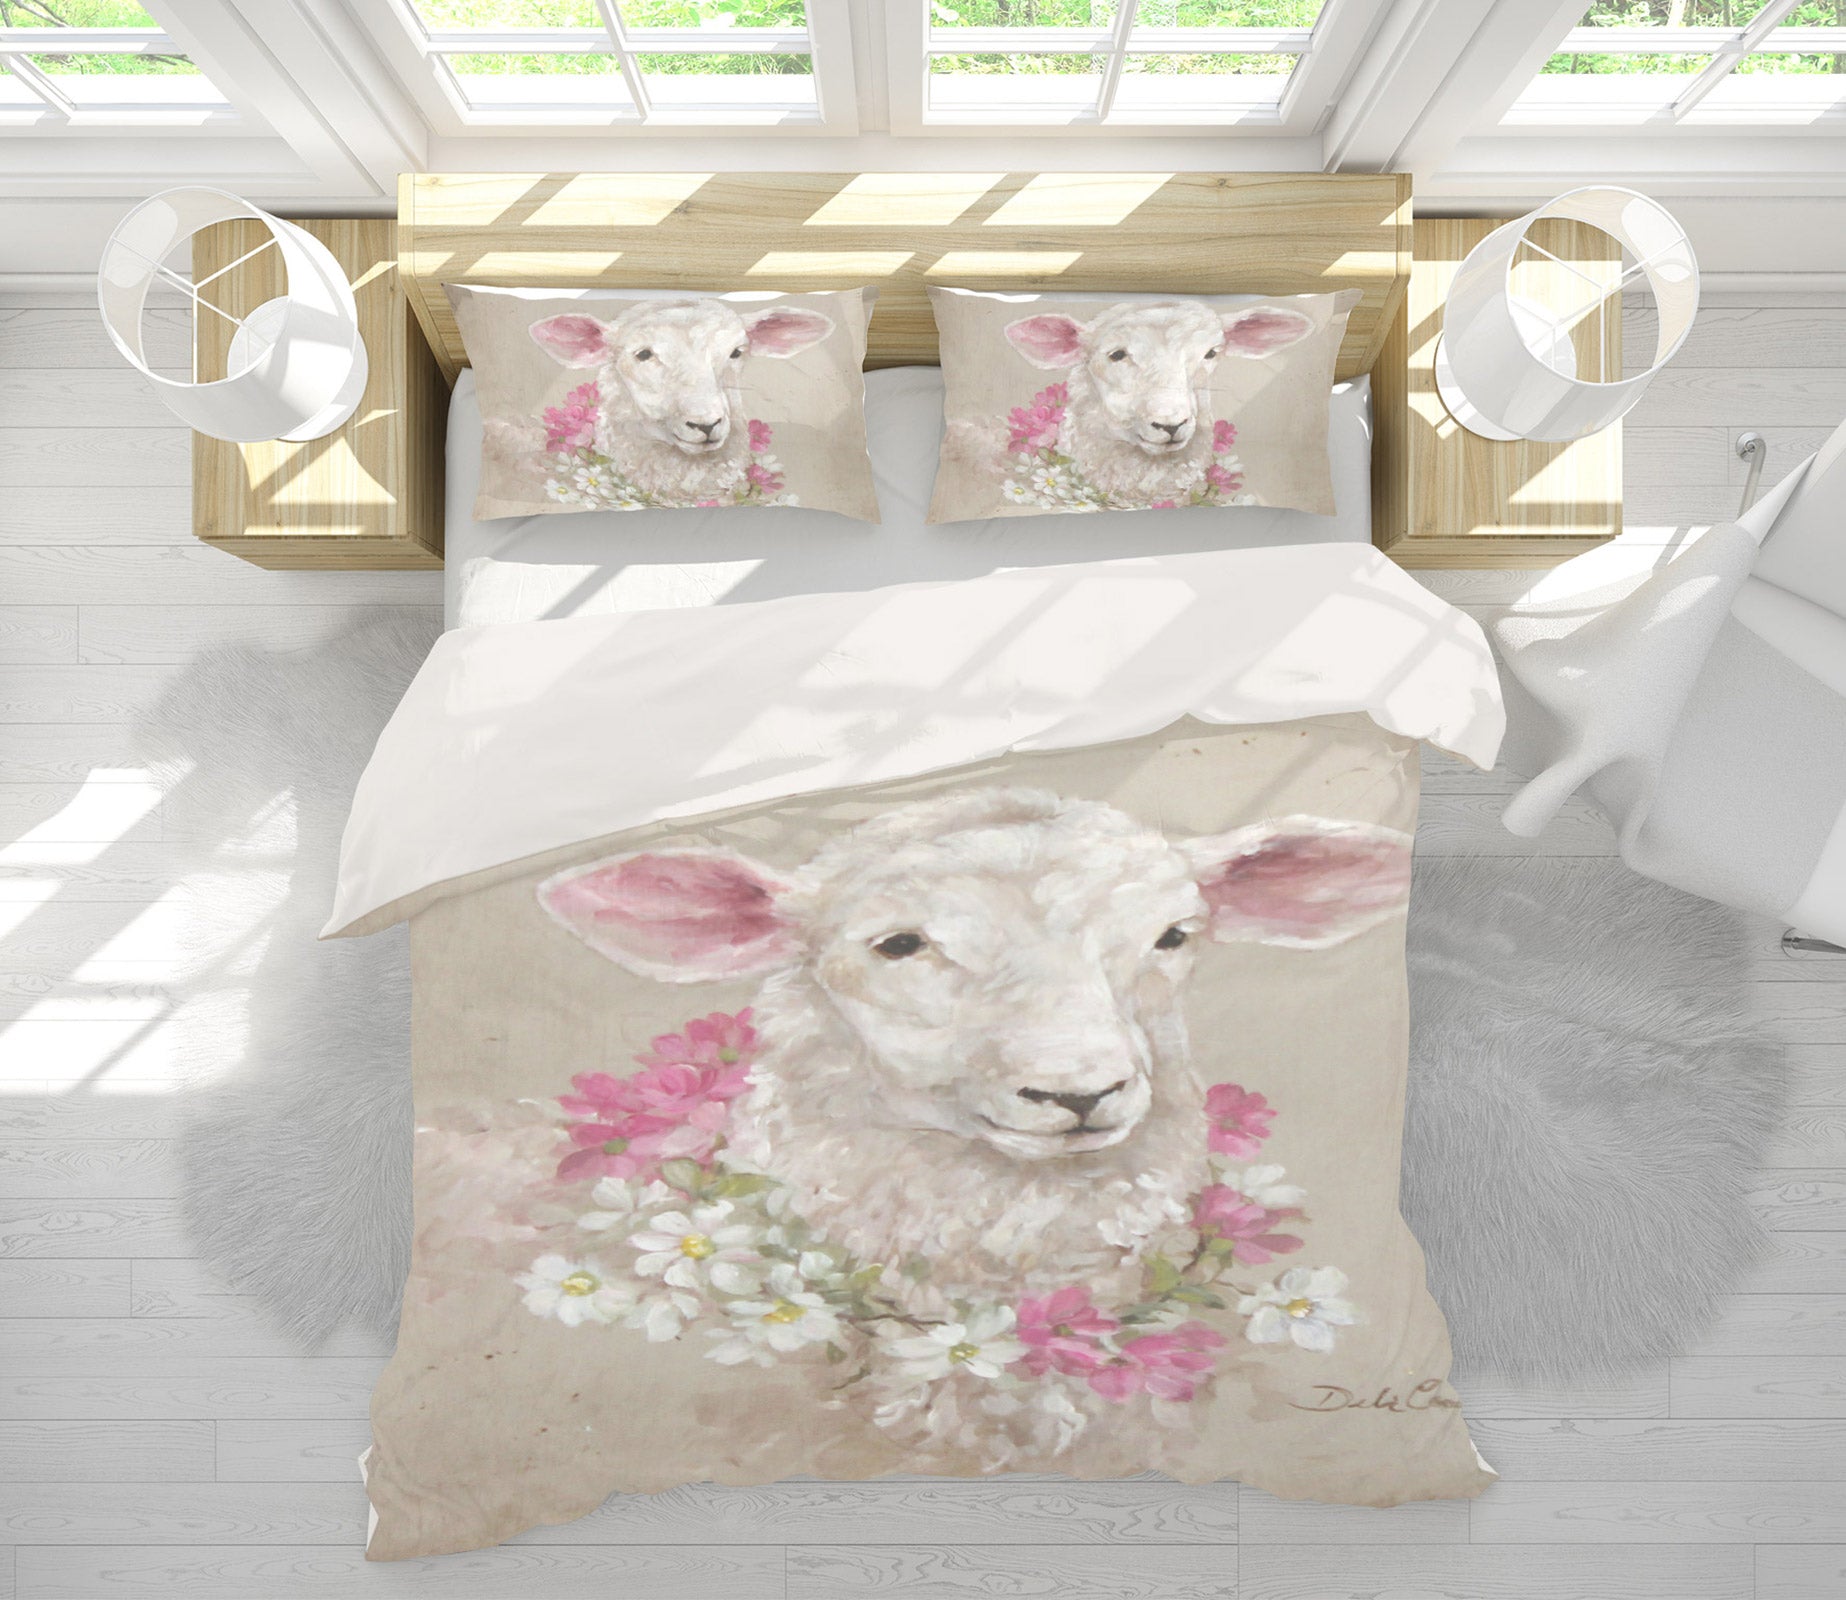 3D Wreathed Sheep 2142 Debi Coules Bedding Bed Pillowcases Quilt